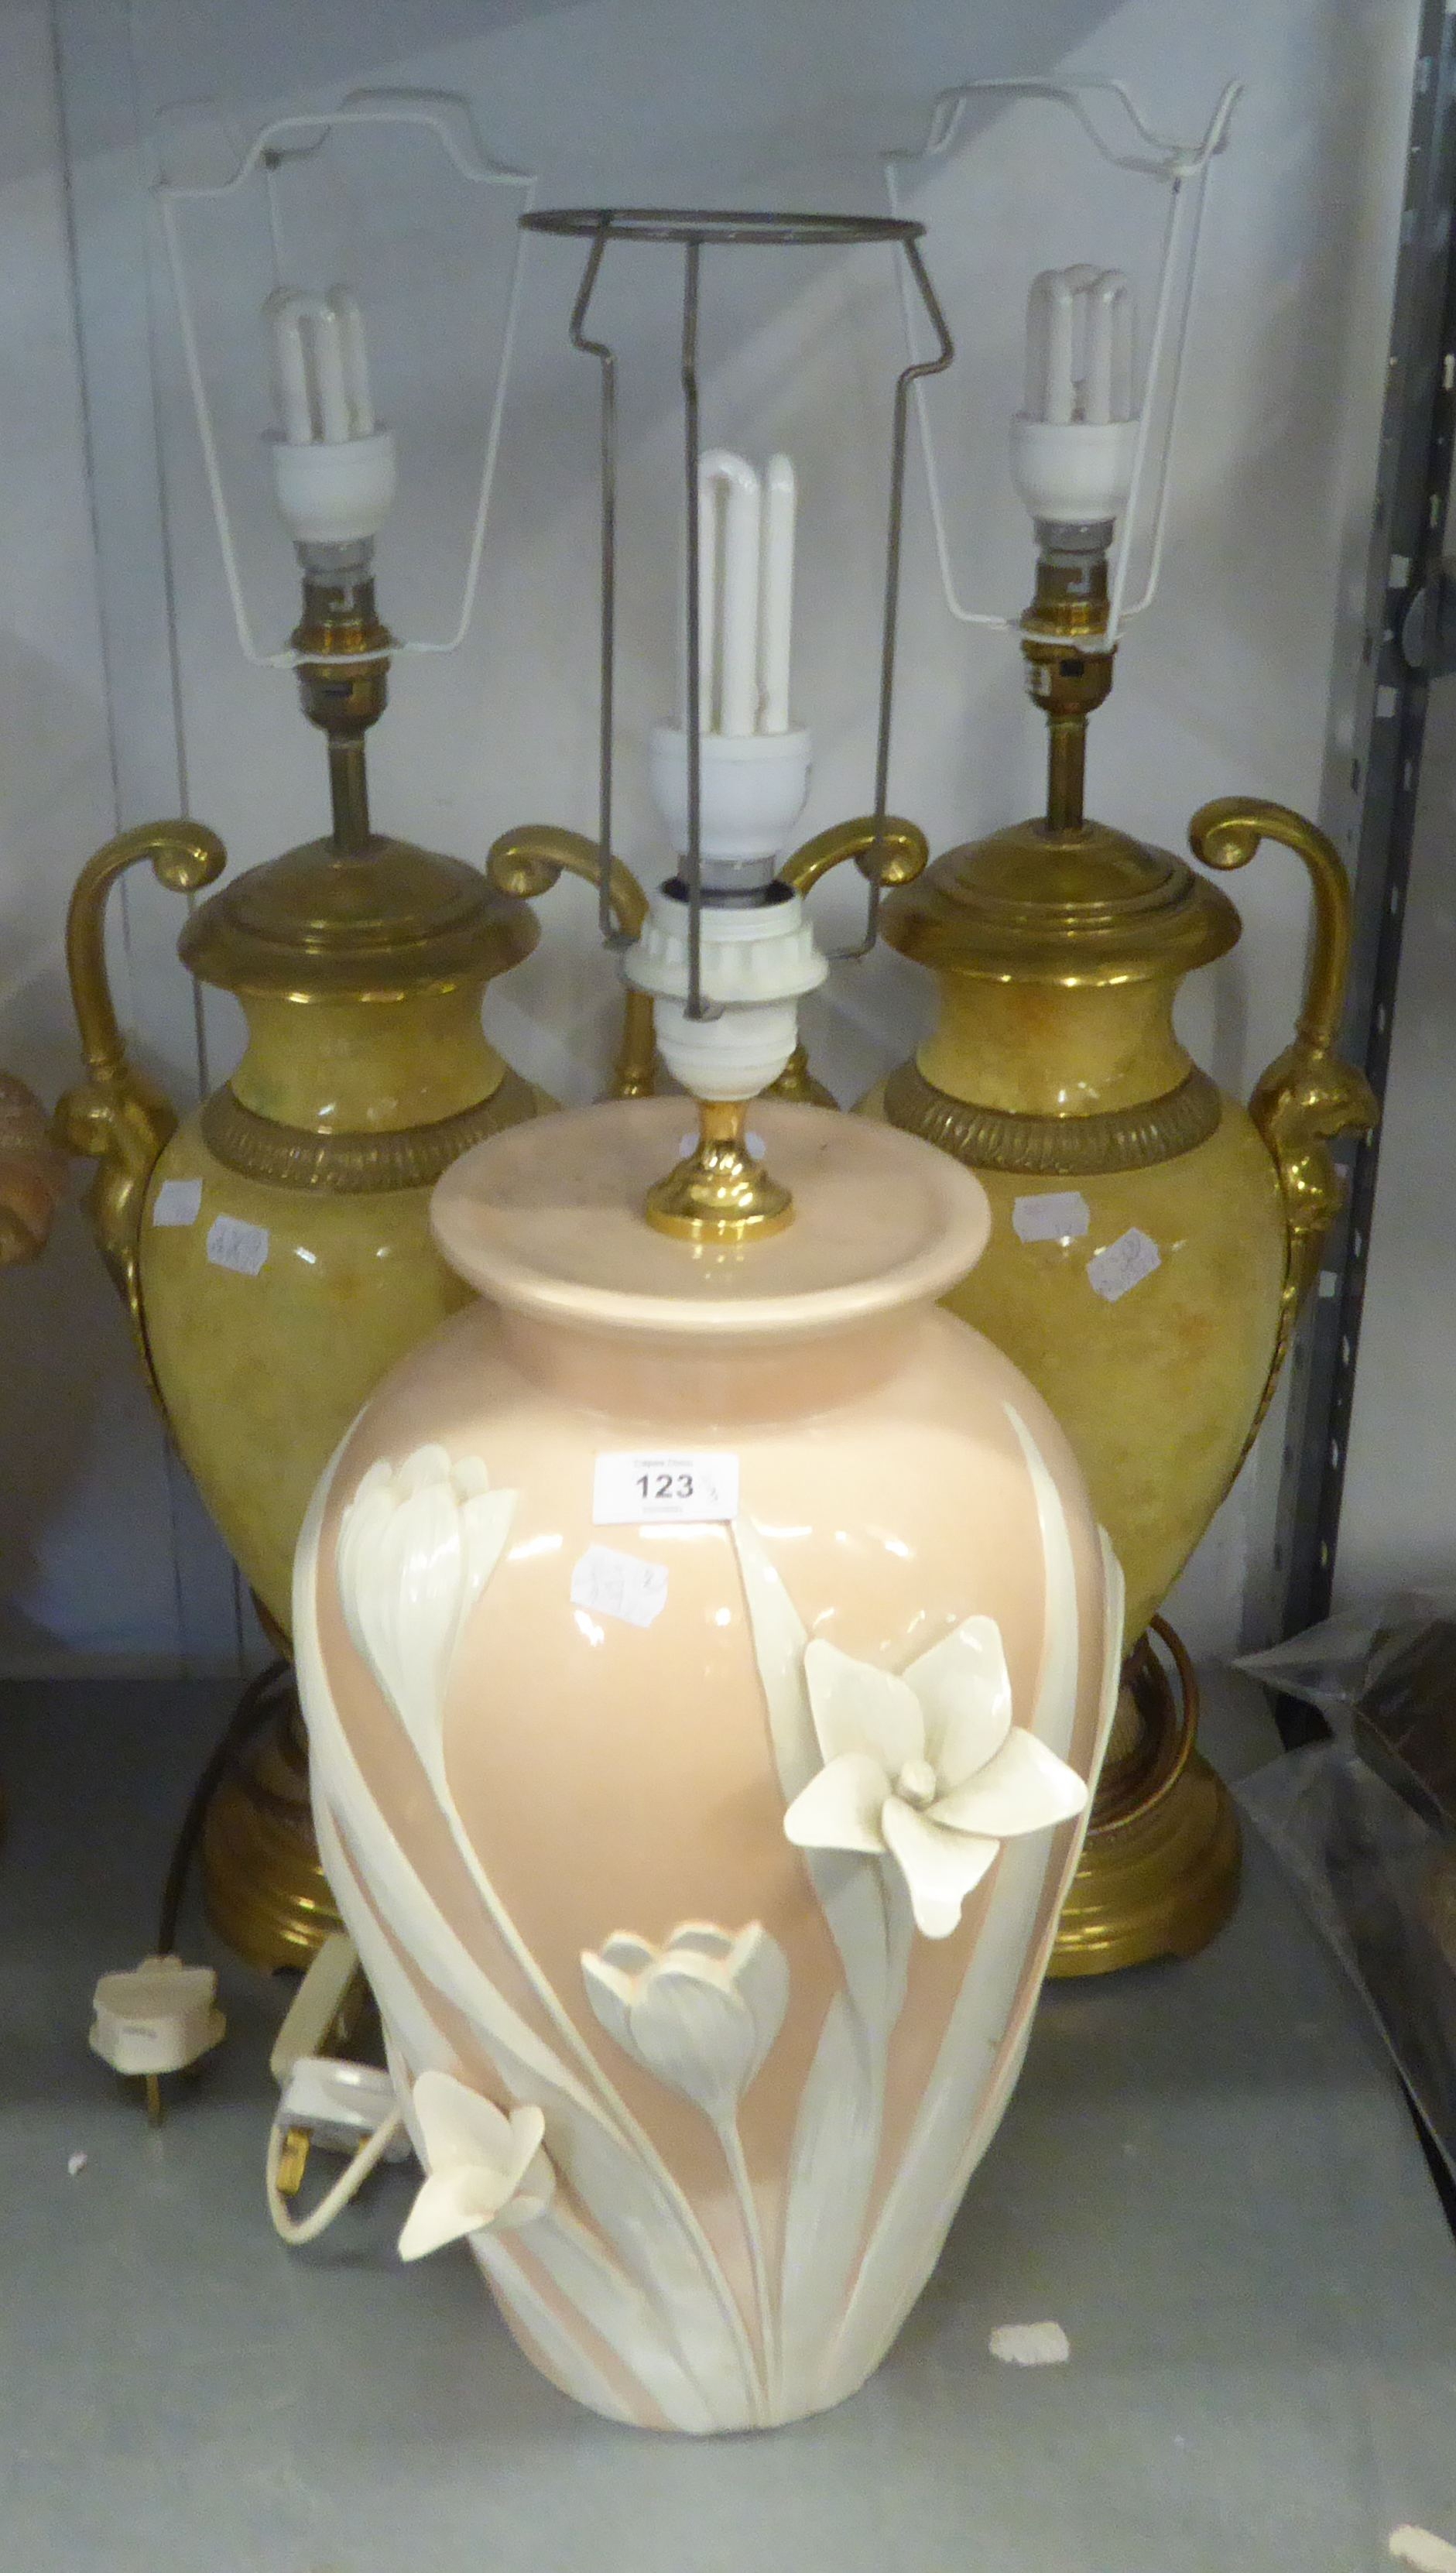 A CASA FINA CERAMIC FLORAL LAMP BASE IN PEACH FINISH AND WHITE EMBOSSED FLOWERS, WITH SHADE, AND A